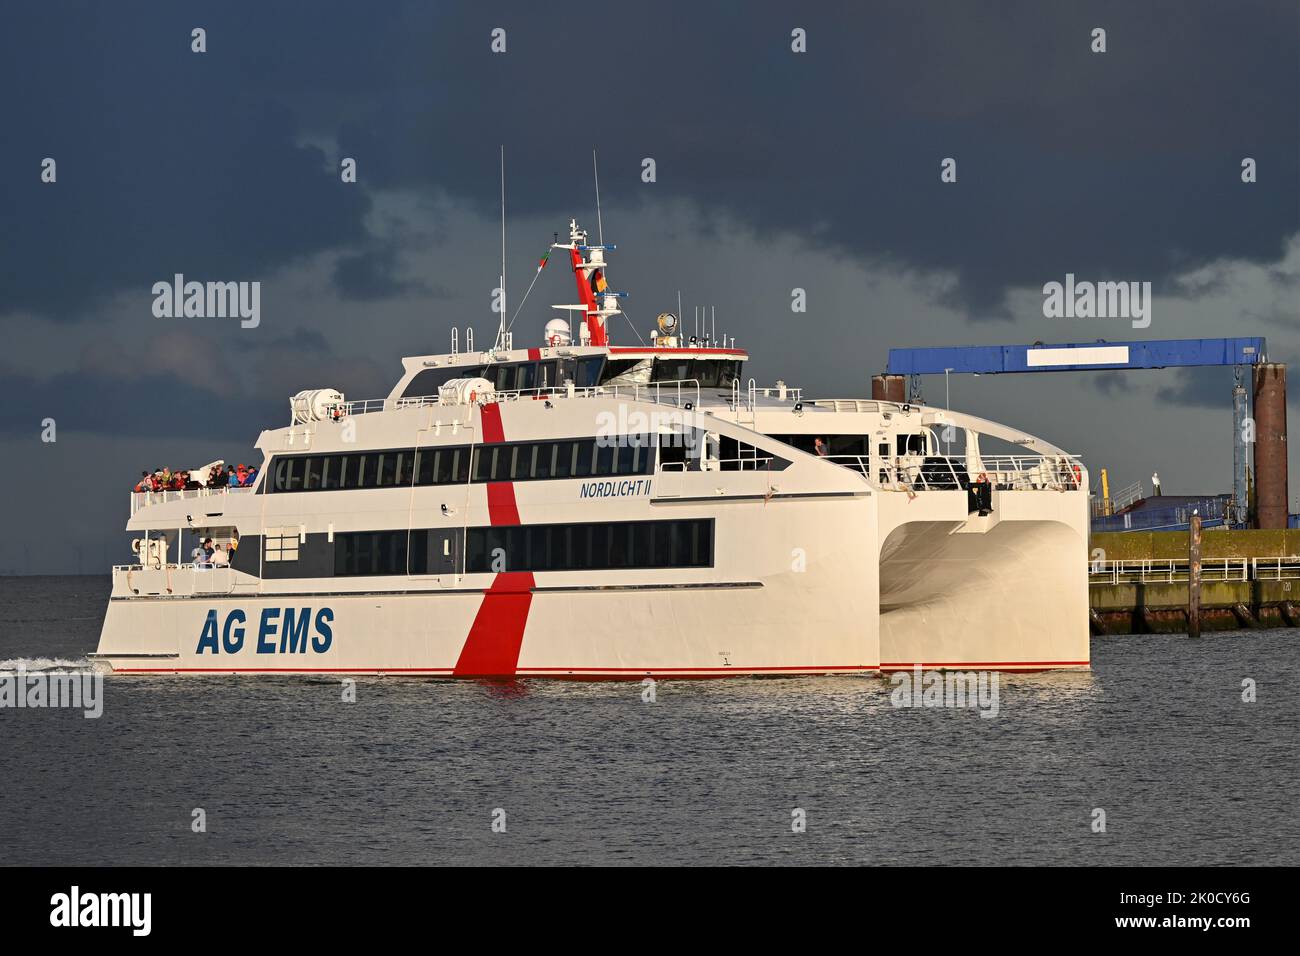 Highspeed Ferry NORDLICHT II arrives at Cuxhaven from Heligoland Stock Photo